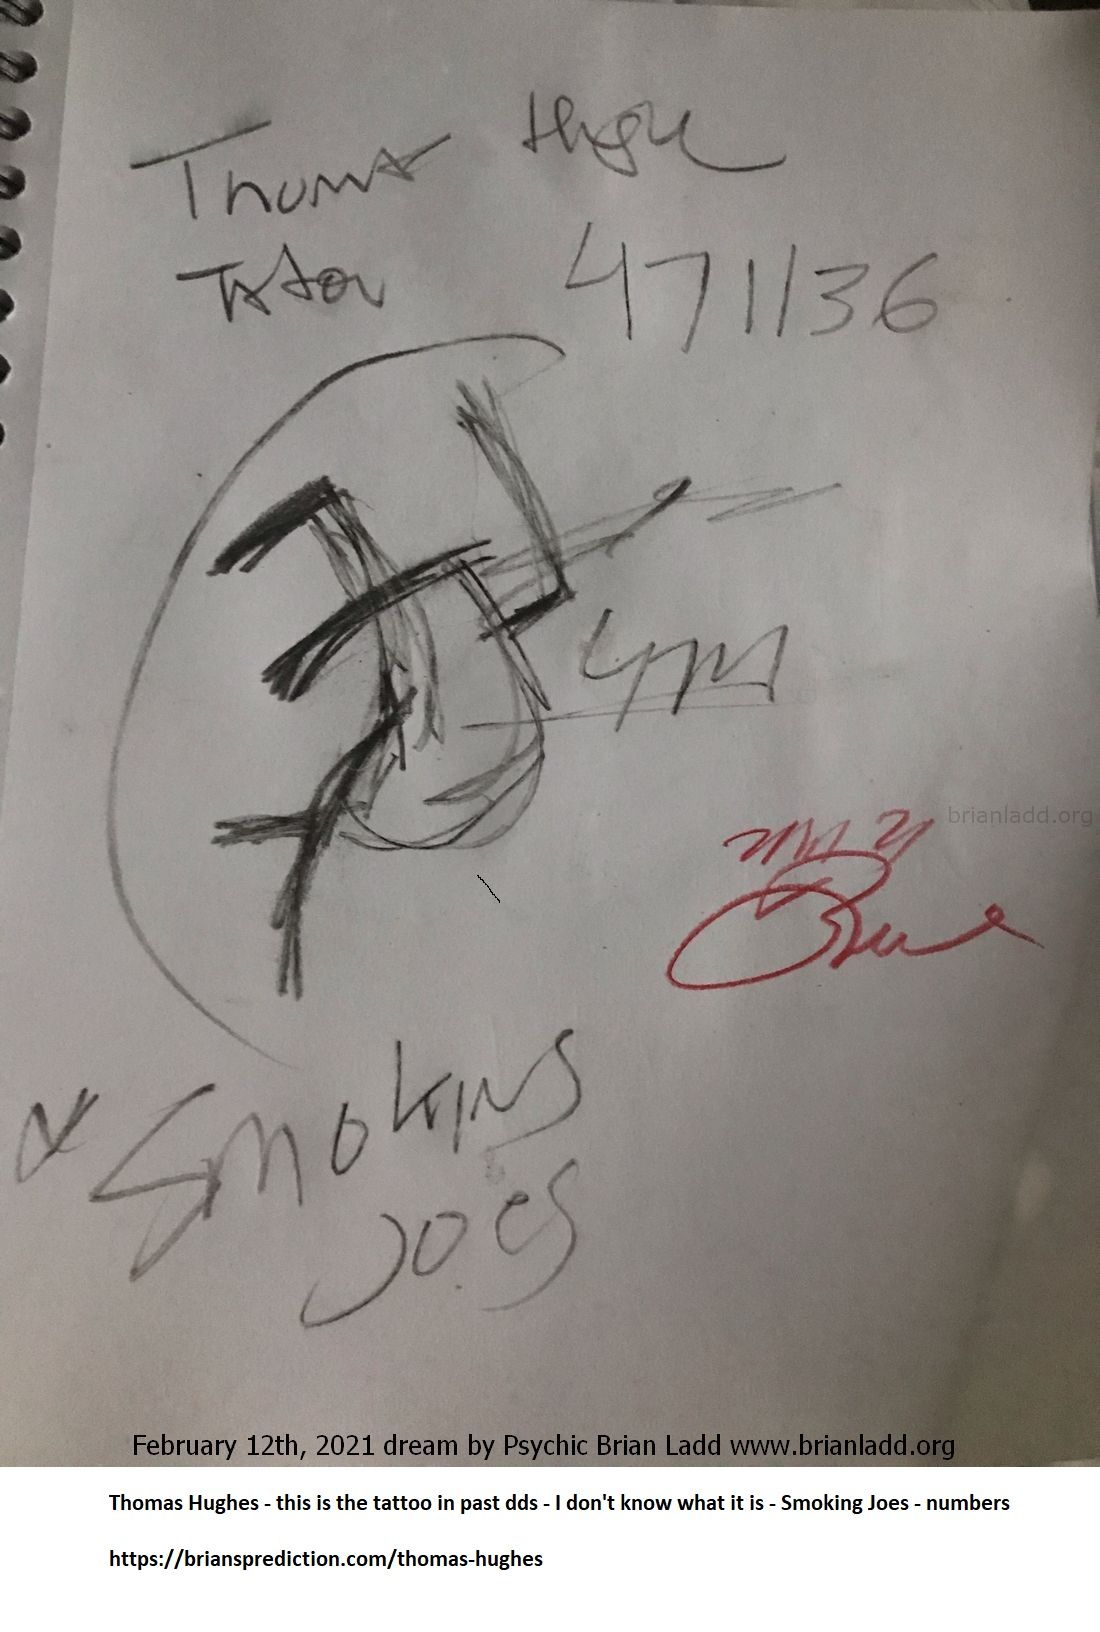 Thomas Hughes This Is The Tattoo In Past Dds I Don T Know What It Is Smoking Joes Numbers - Thomas Hughes - This Is The ...
Thomas Hughes - This Is The Tattoo In Past Dds - I Don'T Know What It Is - Smokin Joes - Numbers   https://briansprediction.com/Thomas-Hughes
